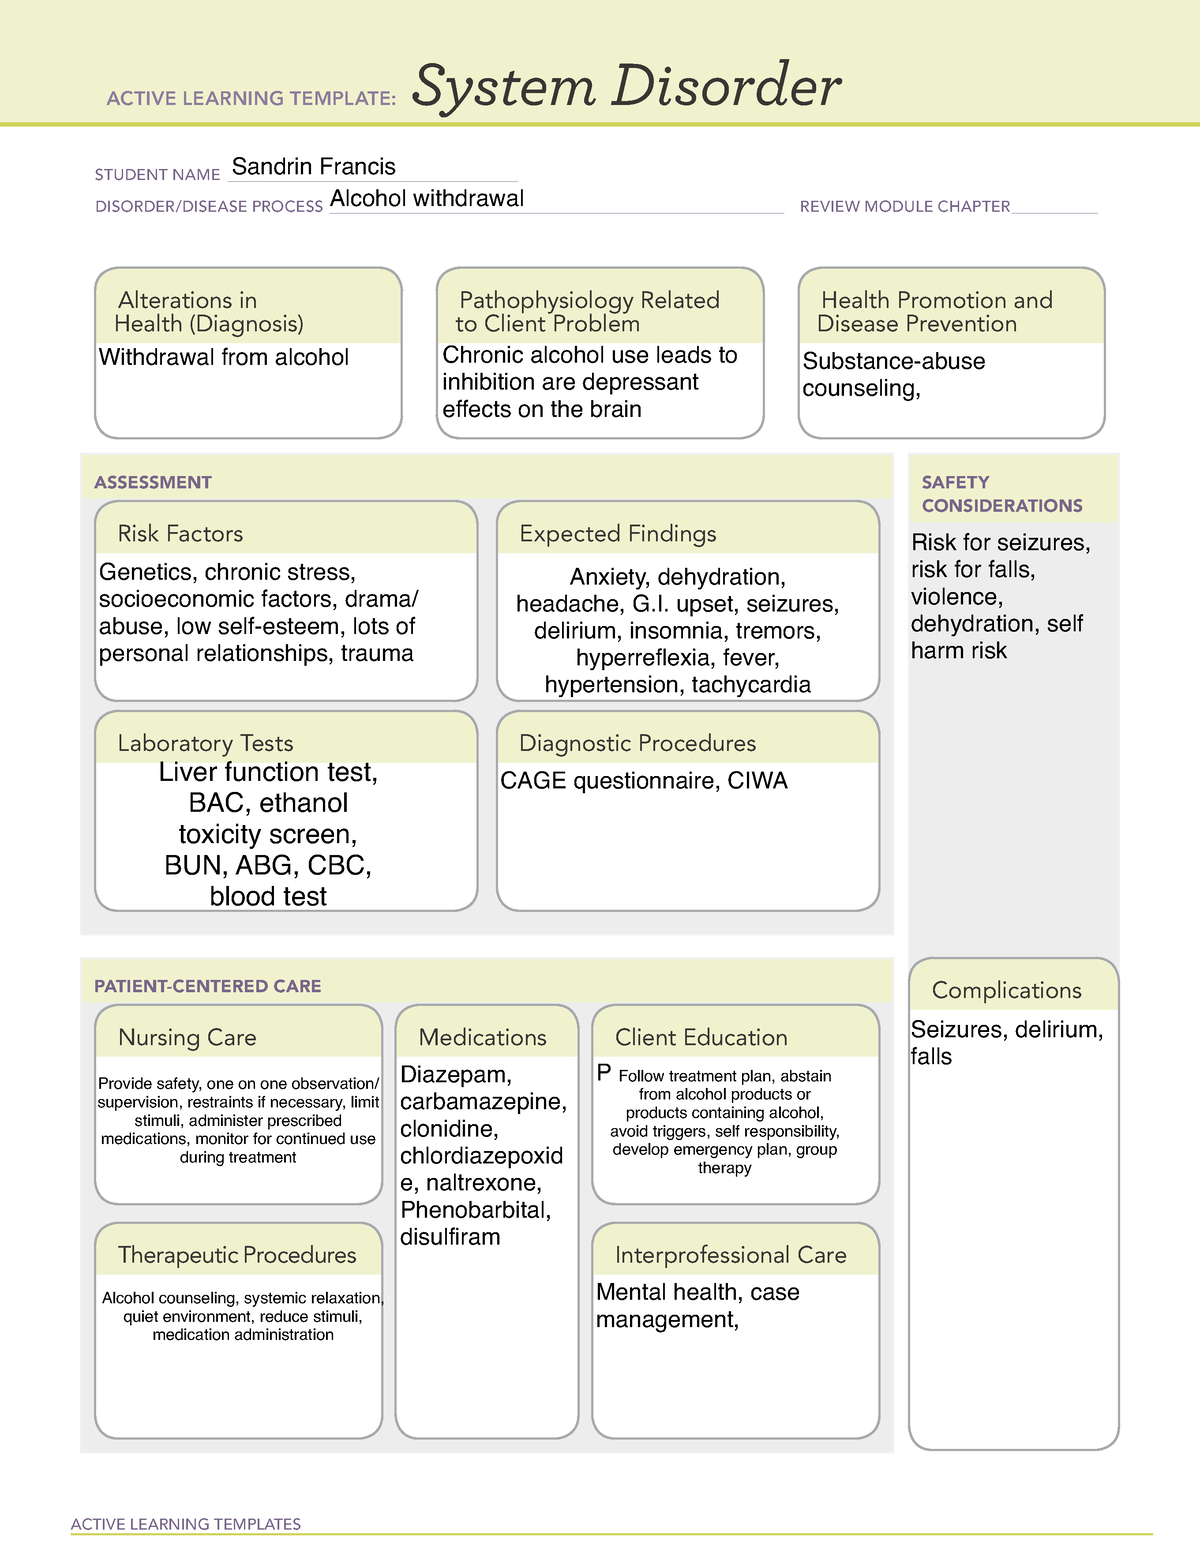 ATI System Disorder Active Learning Template ACTIVE LEARNING